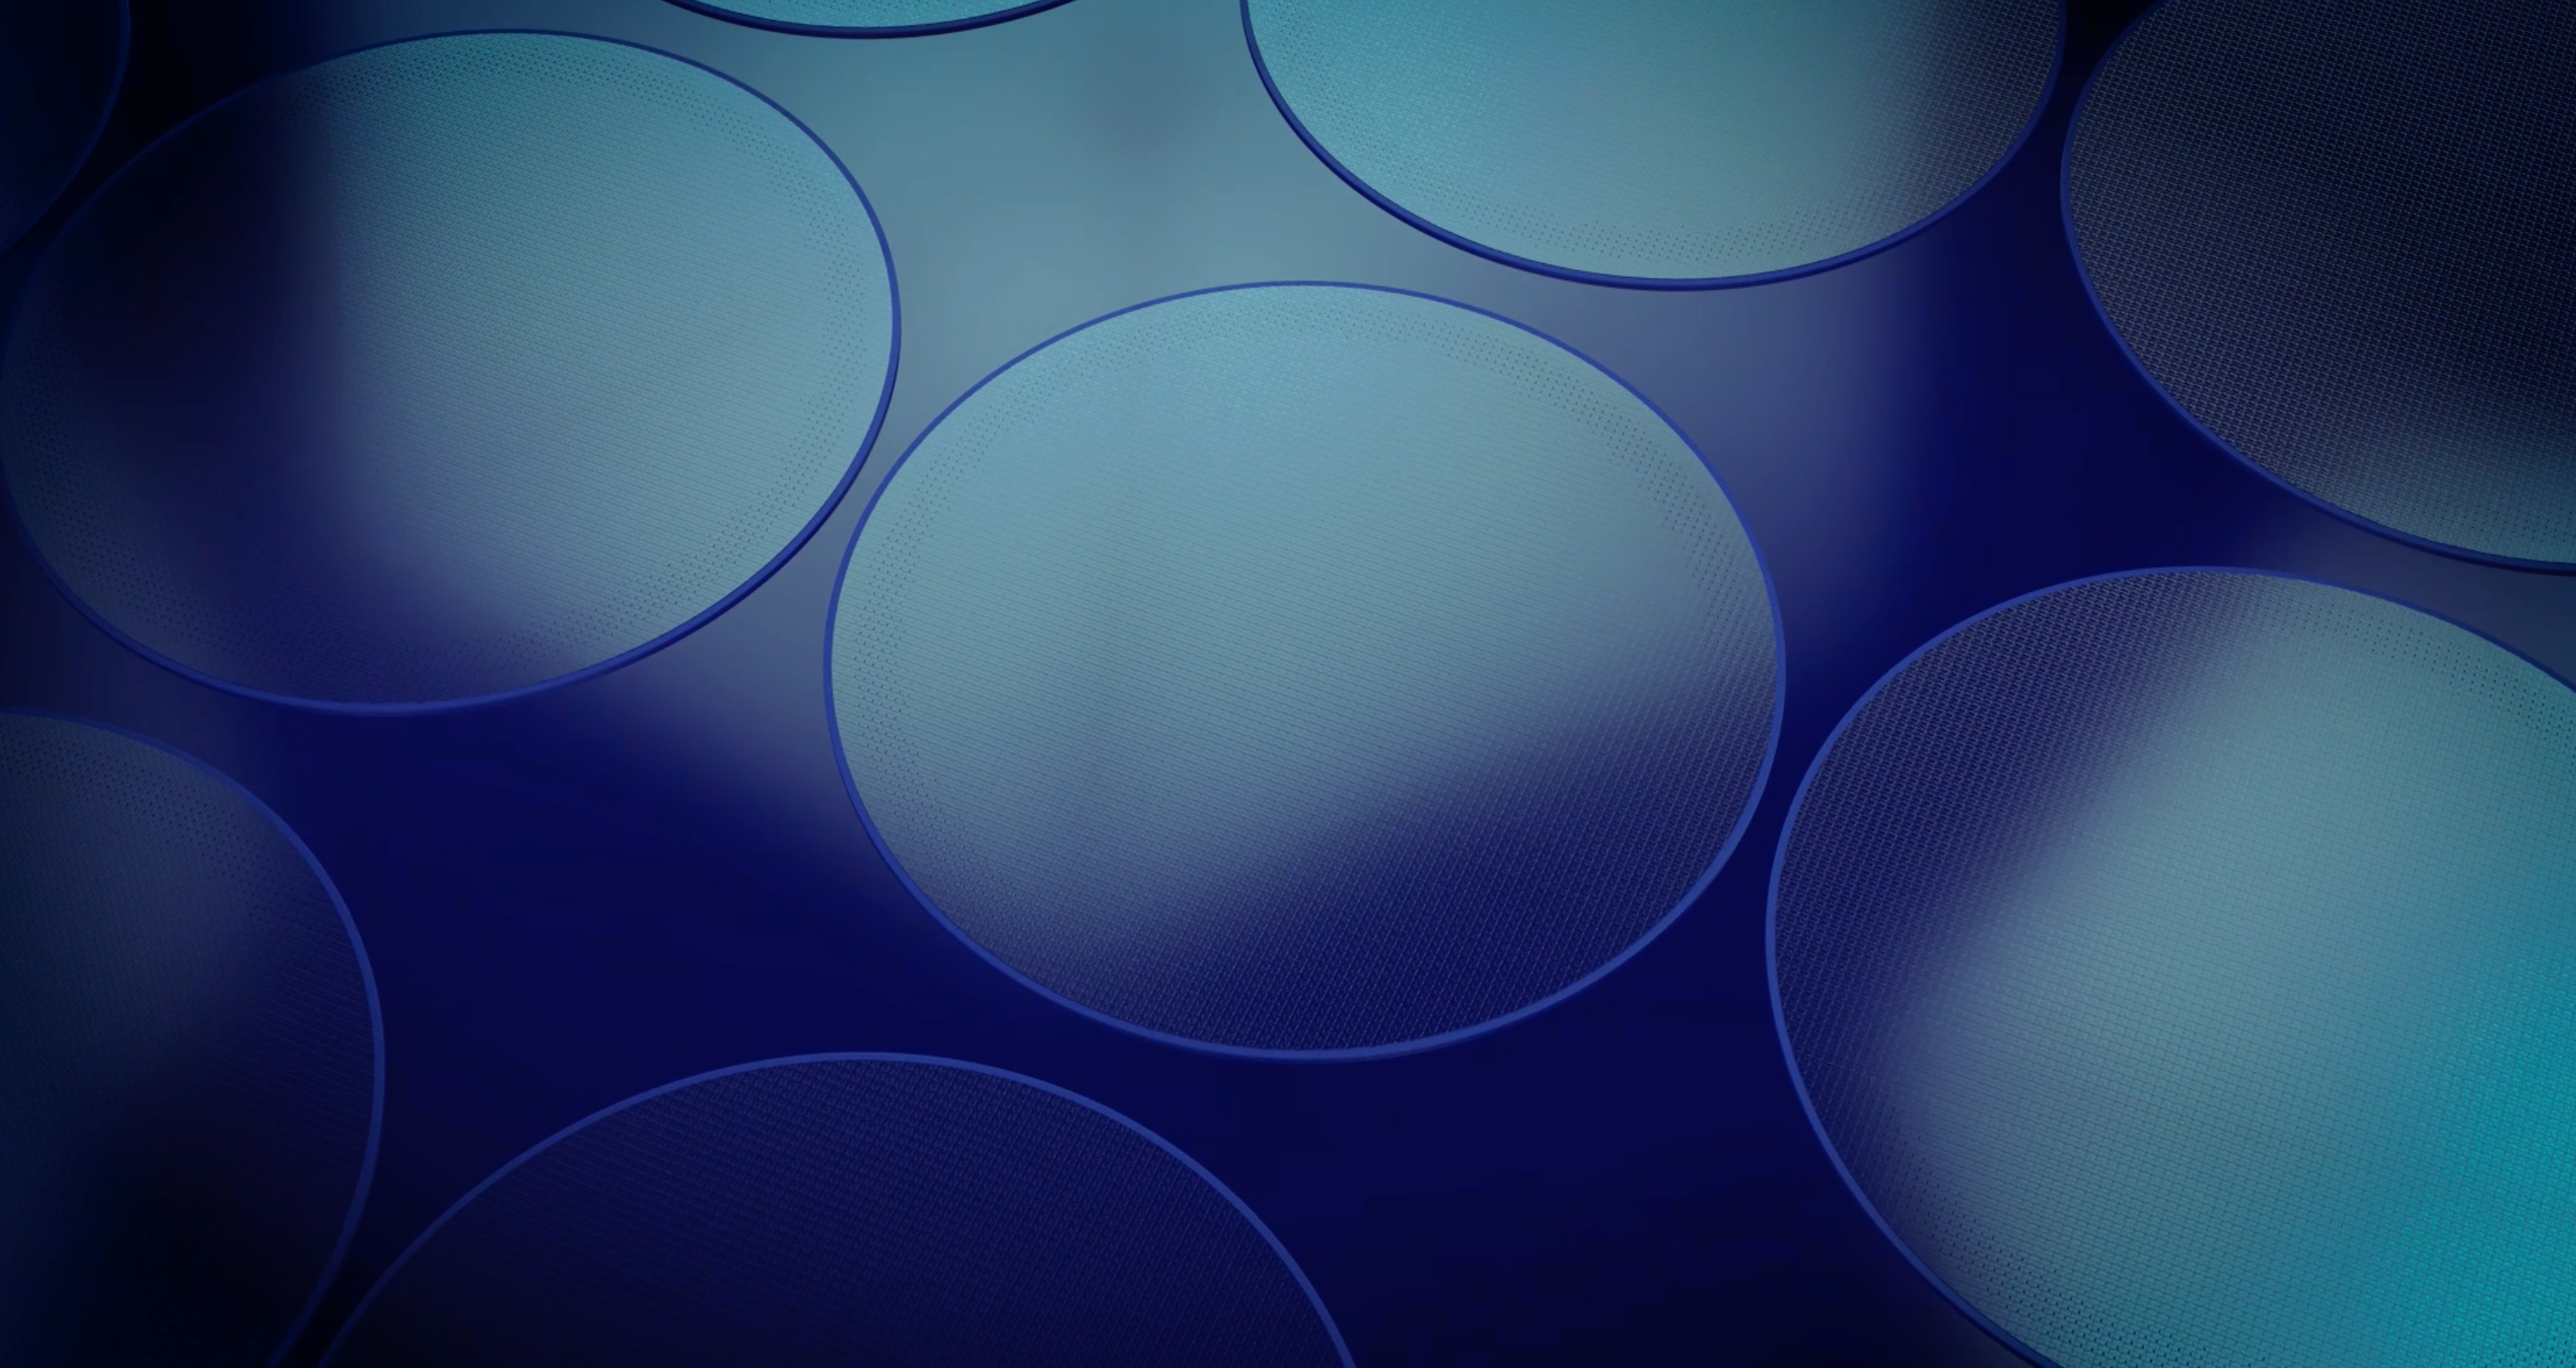 Abstract close up of lit up circles in light blue on dark blue background